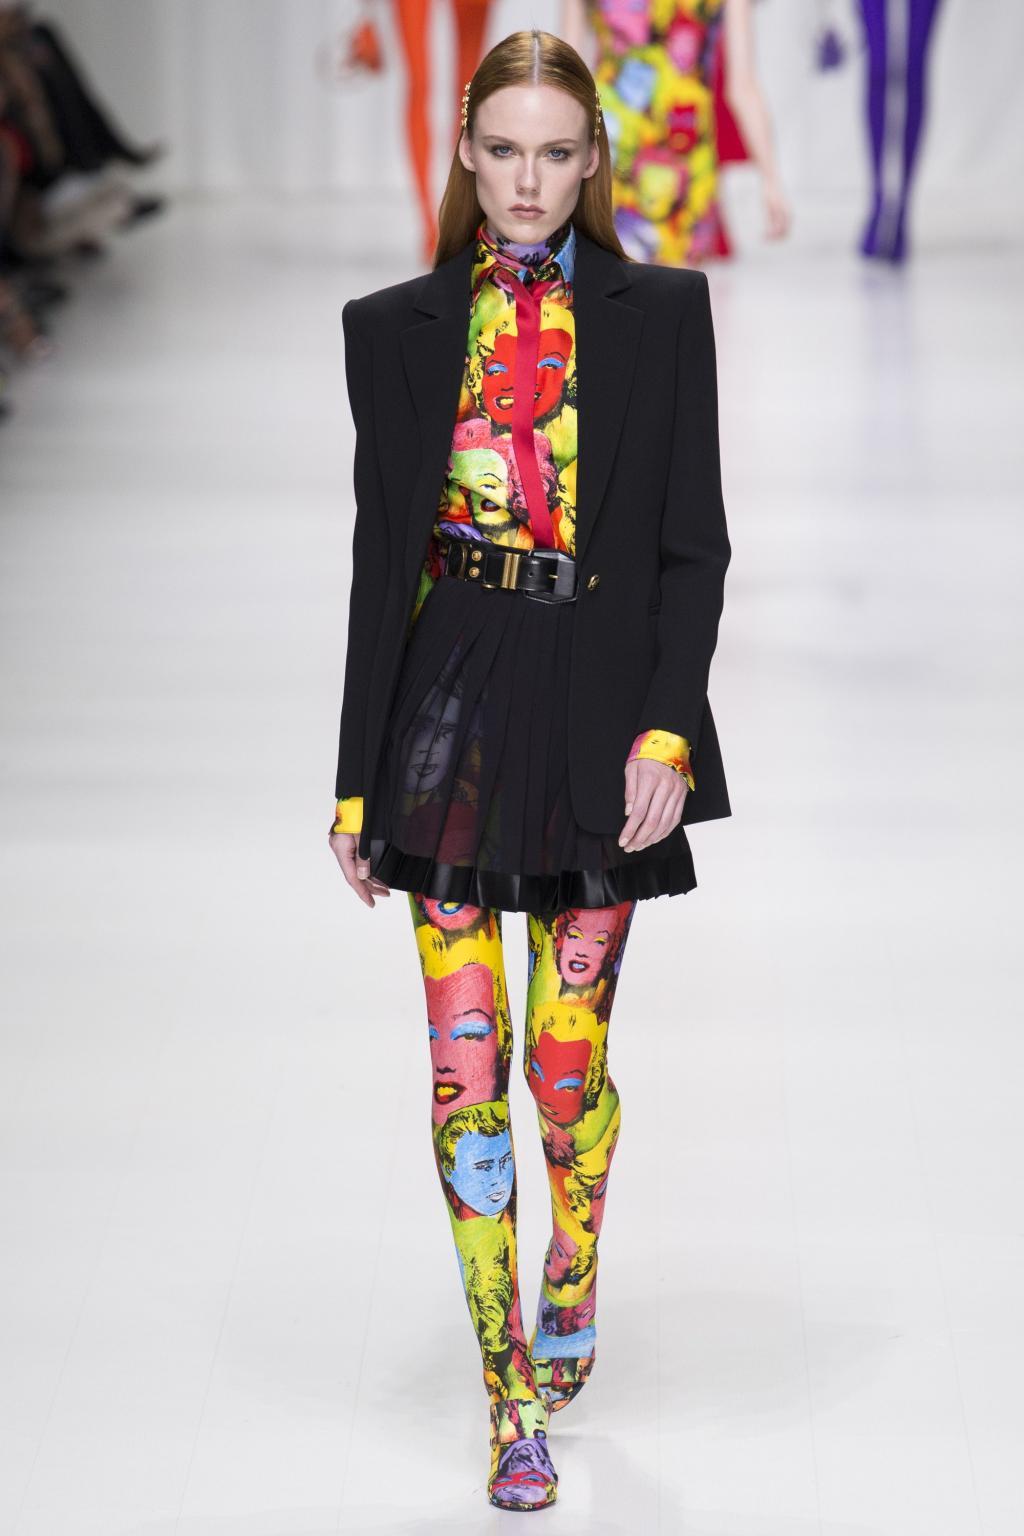 Versace Pop Art Leggings 2018 Runway collection  tribute to Gianni Versace's love of art and contemporary fashion in the Spring Summer 1991 collection. 
Pop Art Marilyn Monroe SS'91 print
Size 40 IT
Waist about 27